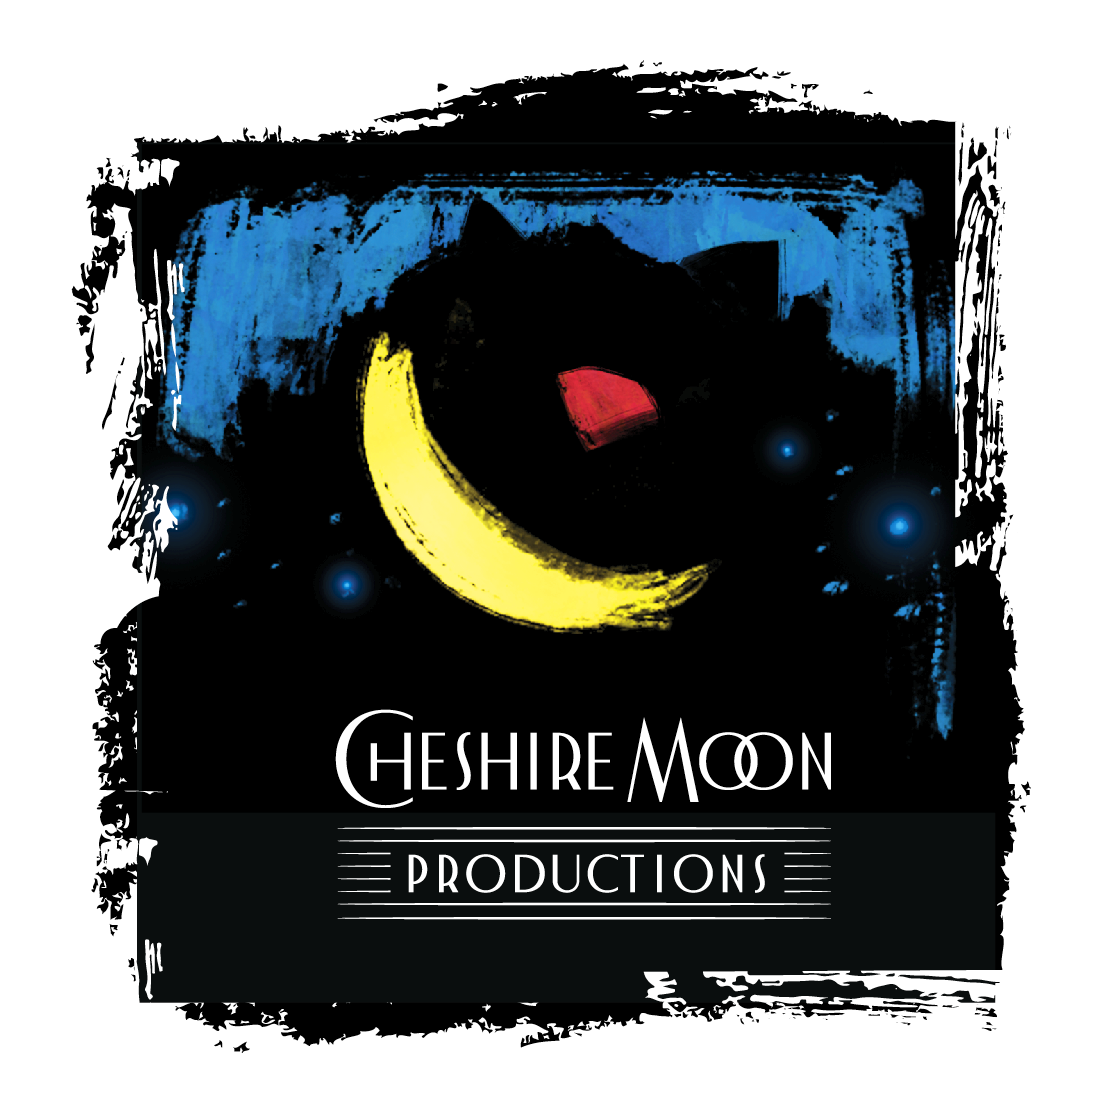 Cheshire Moon Productions